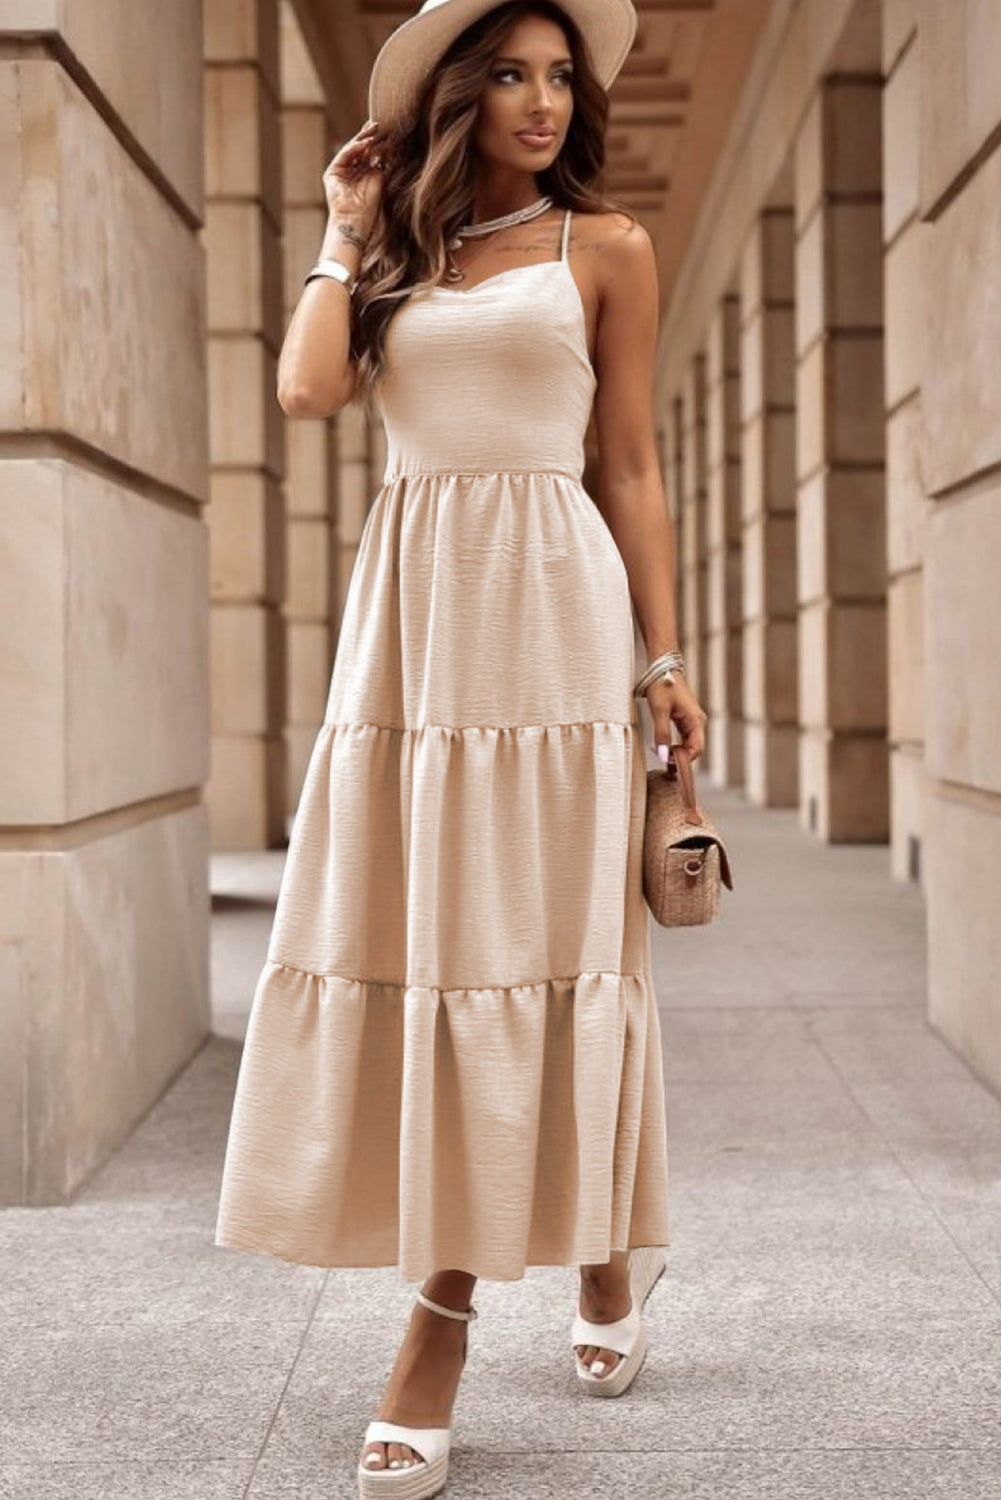 Oatmeal Crossover Backless Bodice Tiered Maxi Dress